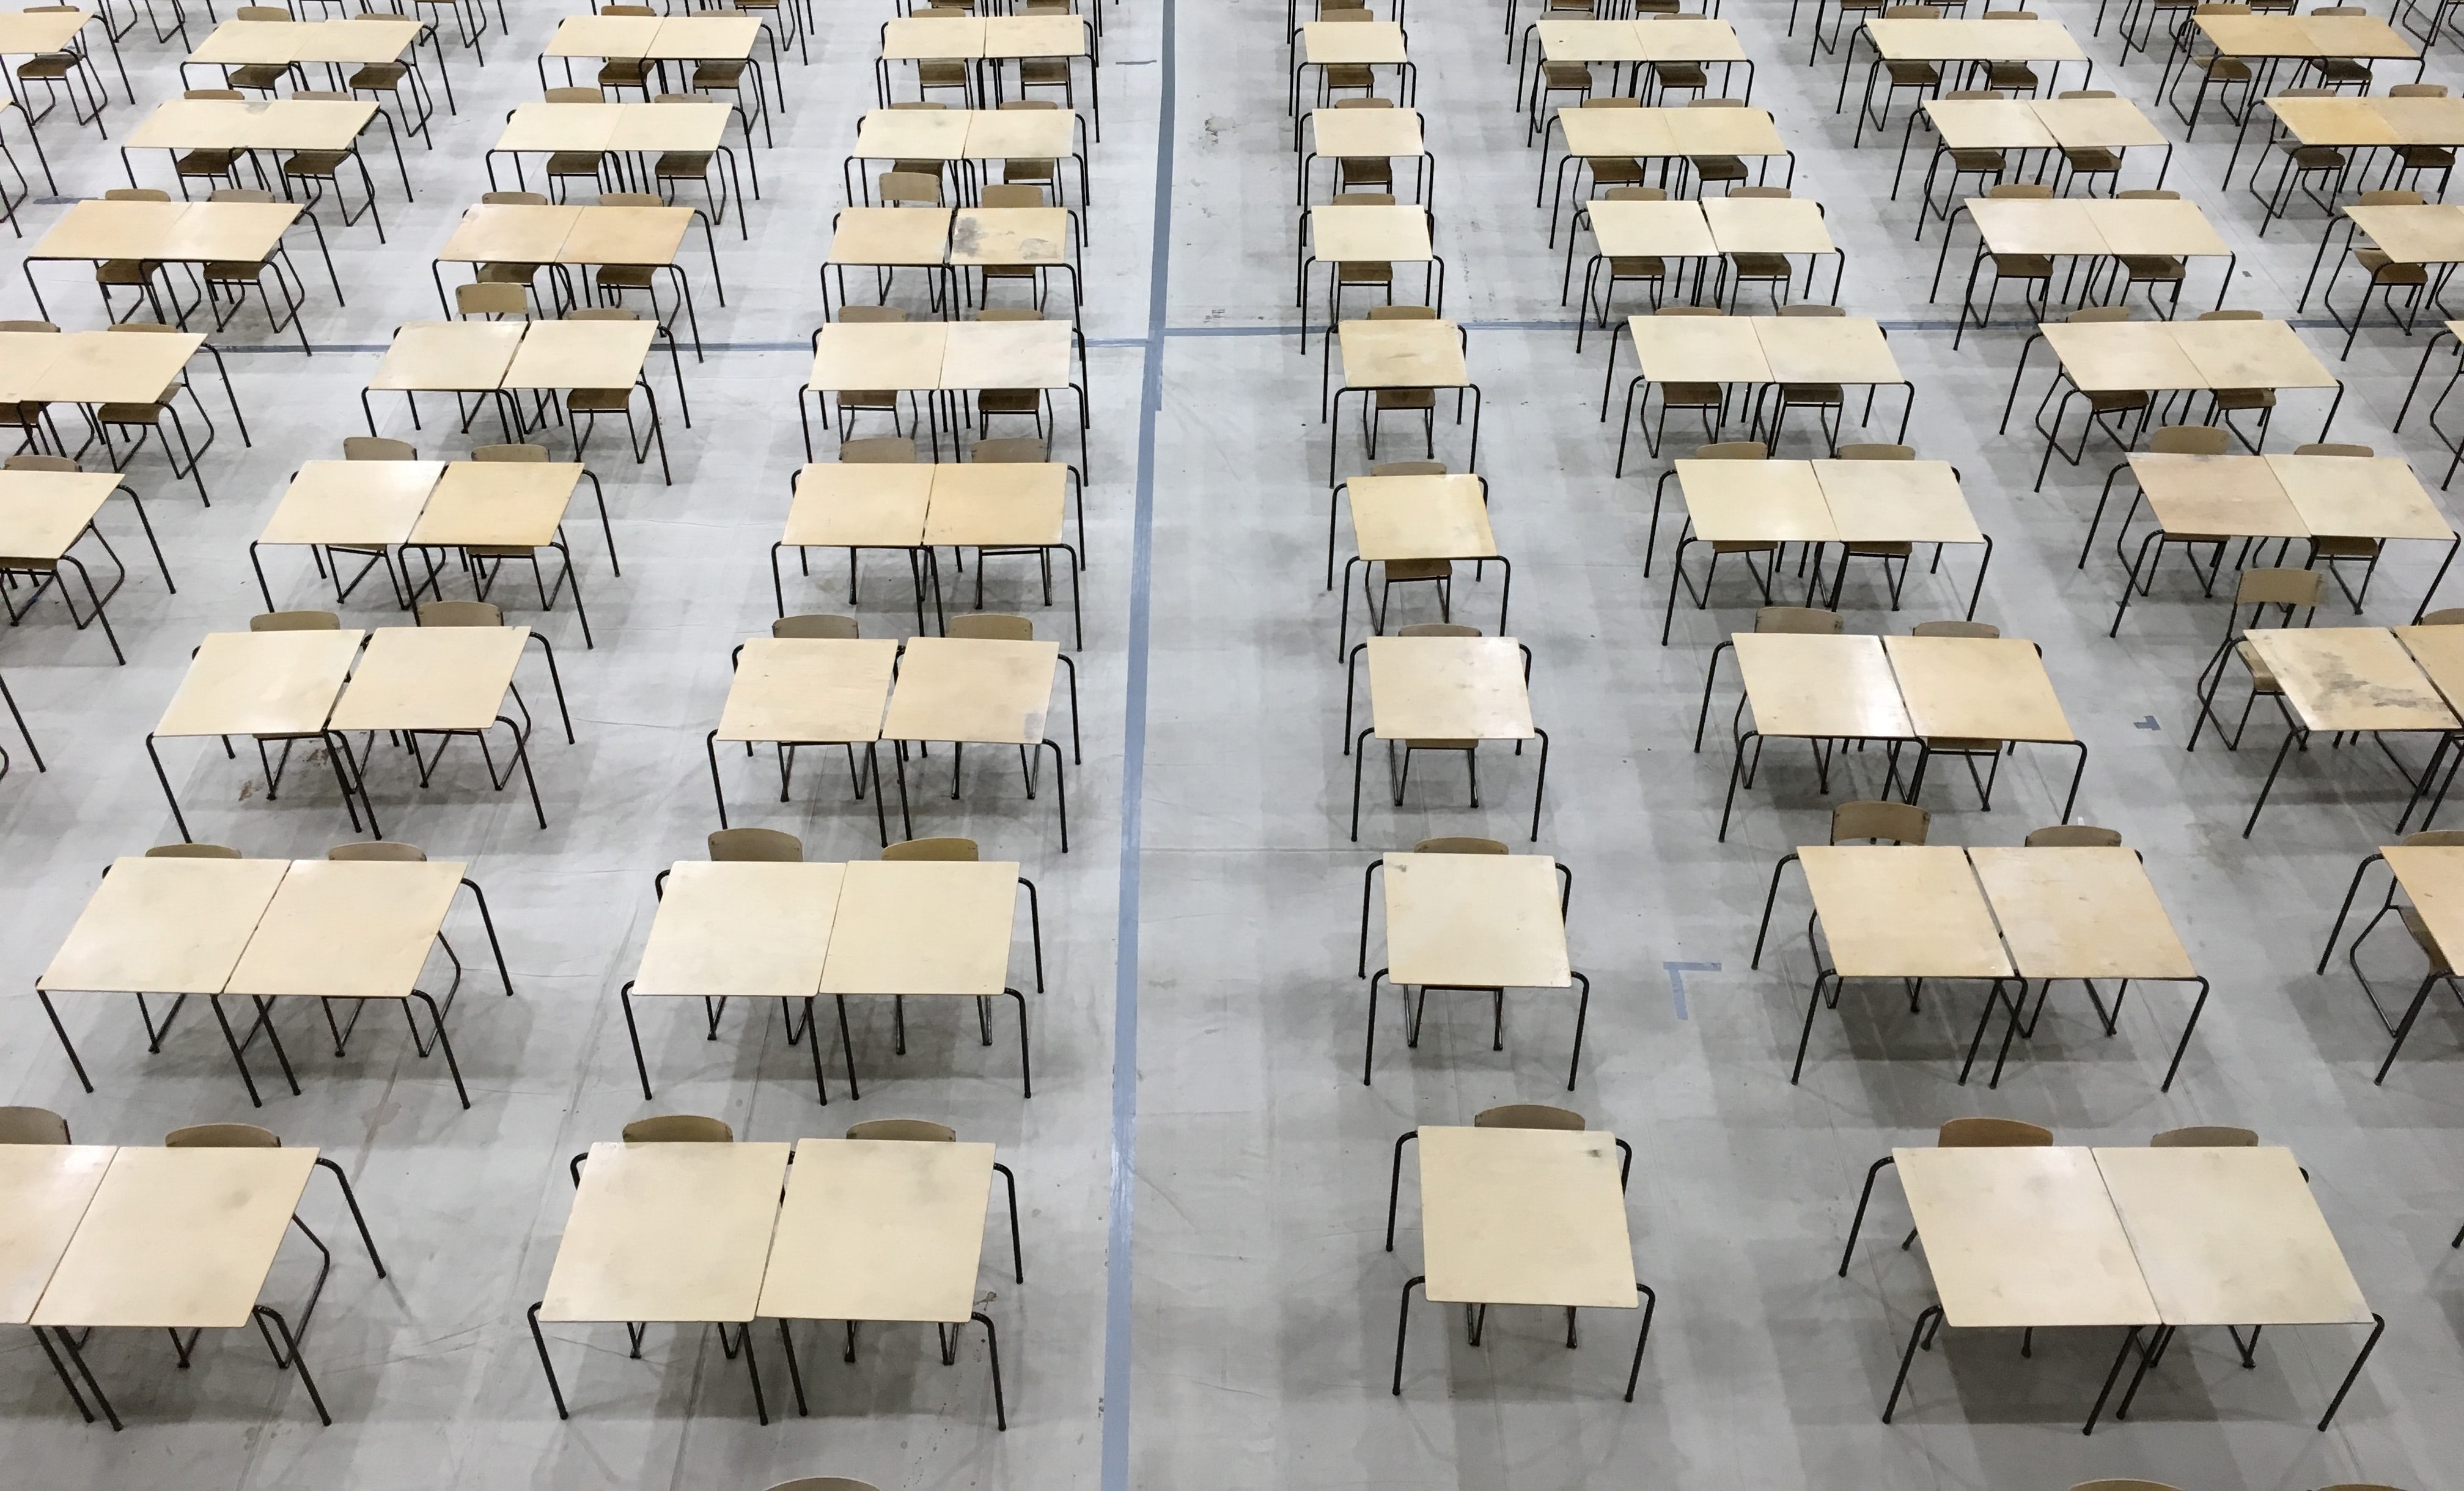 exam hall with lots of tables and chairs